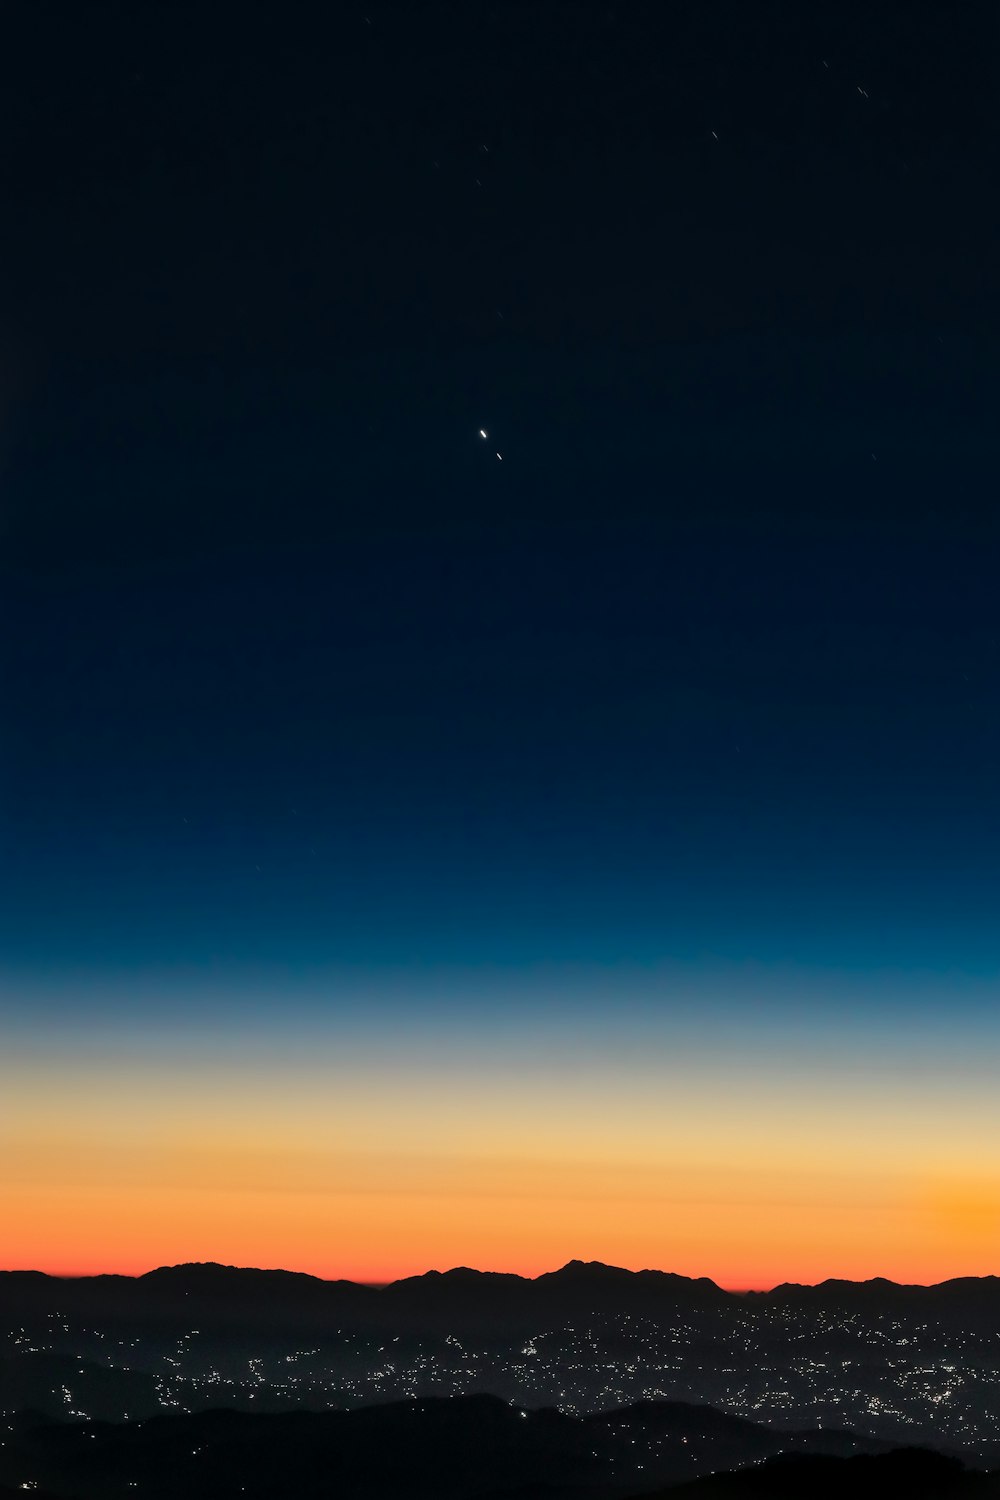 a view of the moon and the earth from a distance